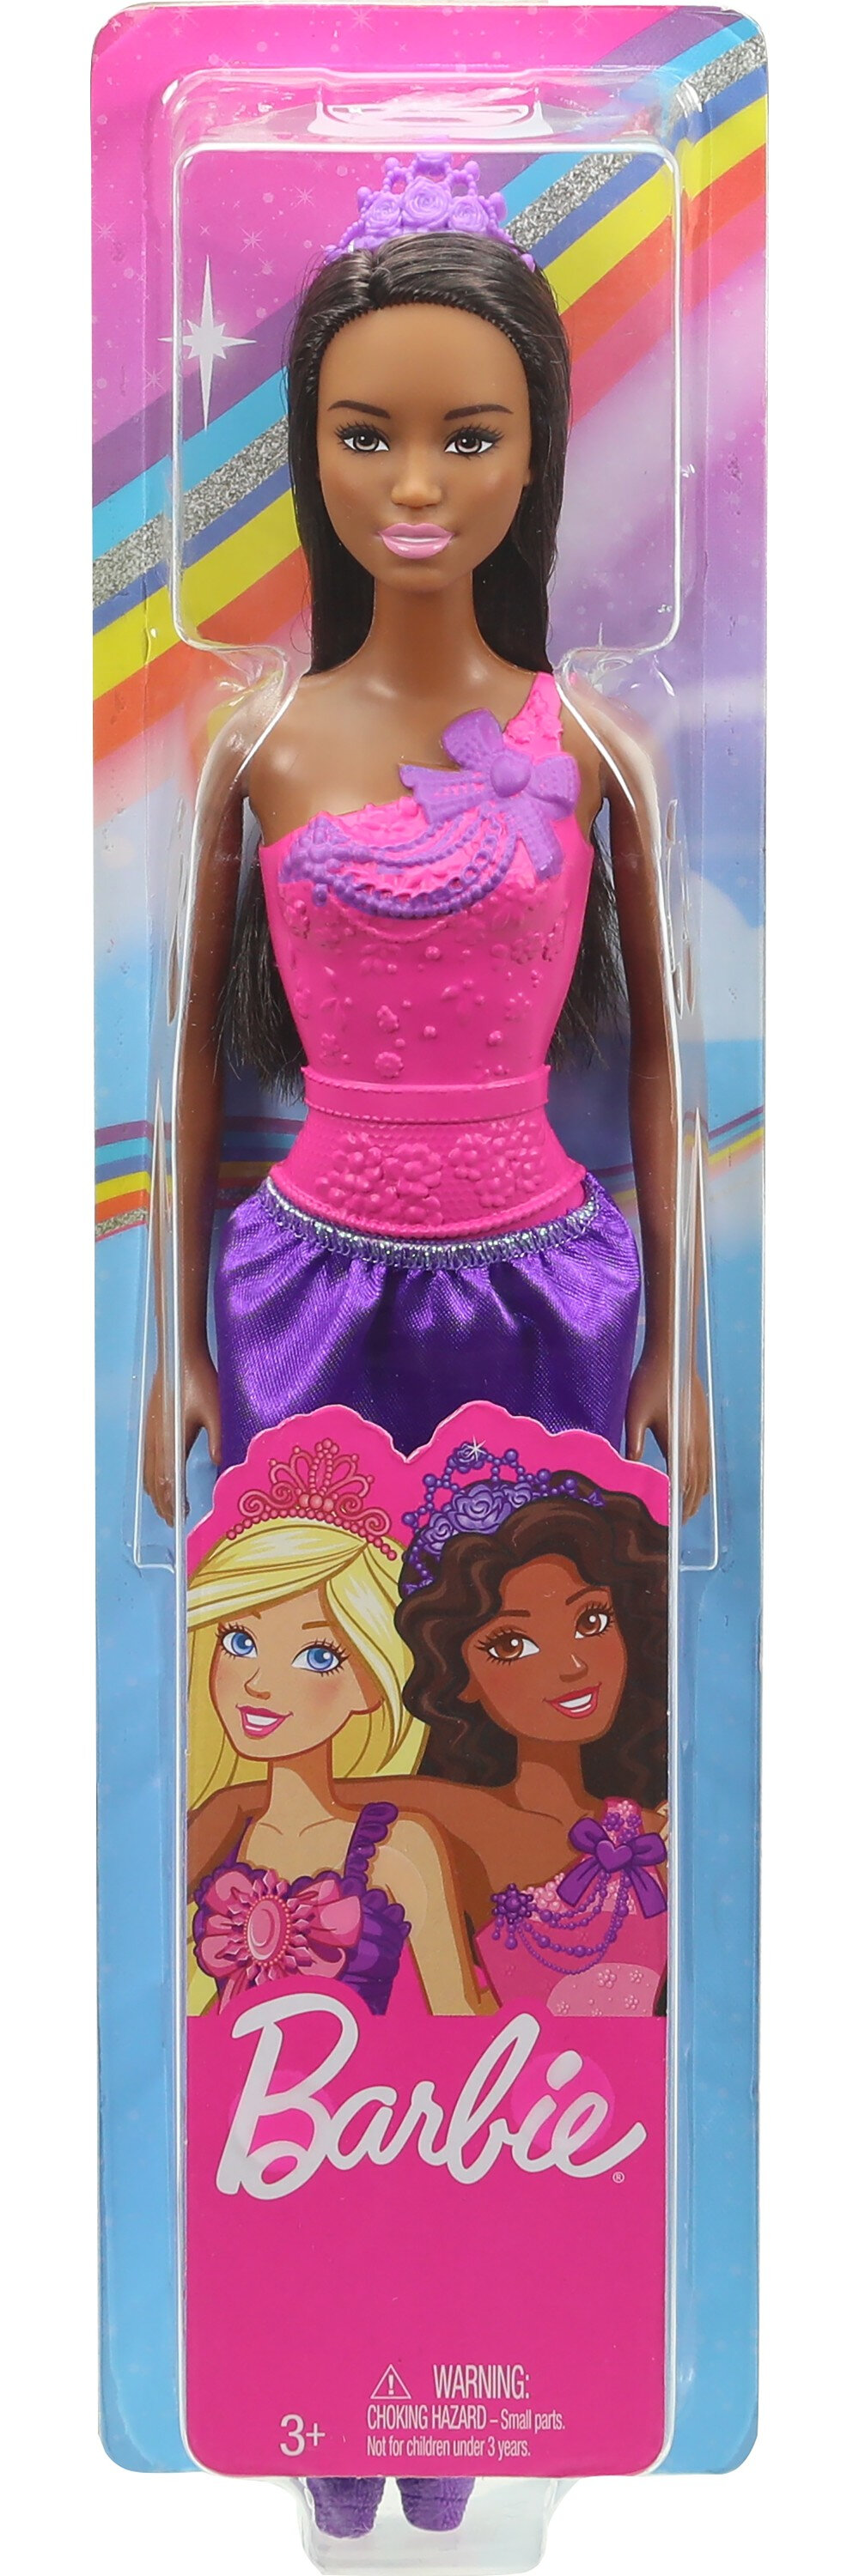 Barbie Dreamtopia Royal Doll, Royal Brunette with Purple Removable Skirt & Accessories - image 6 of 6